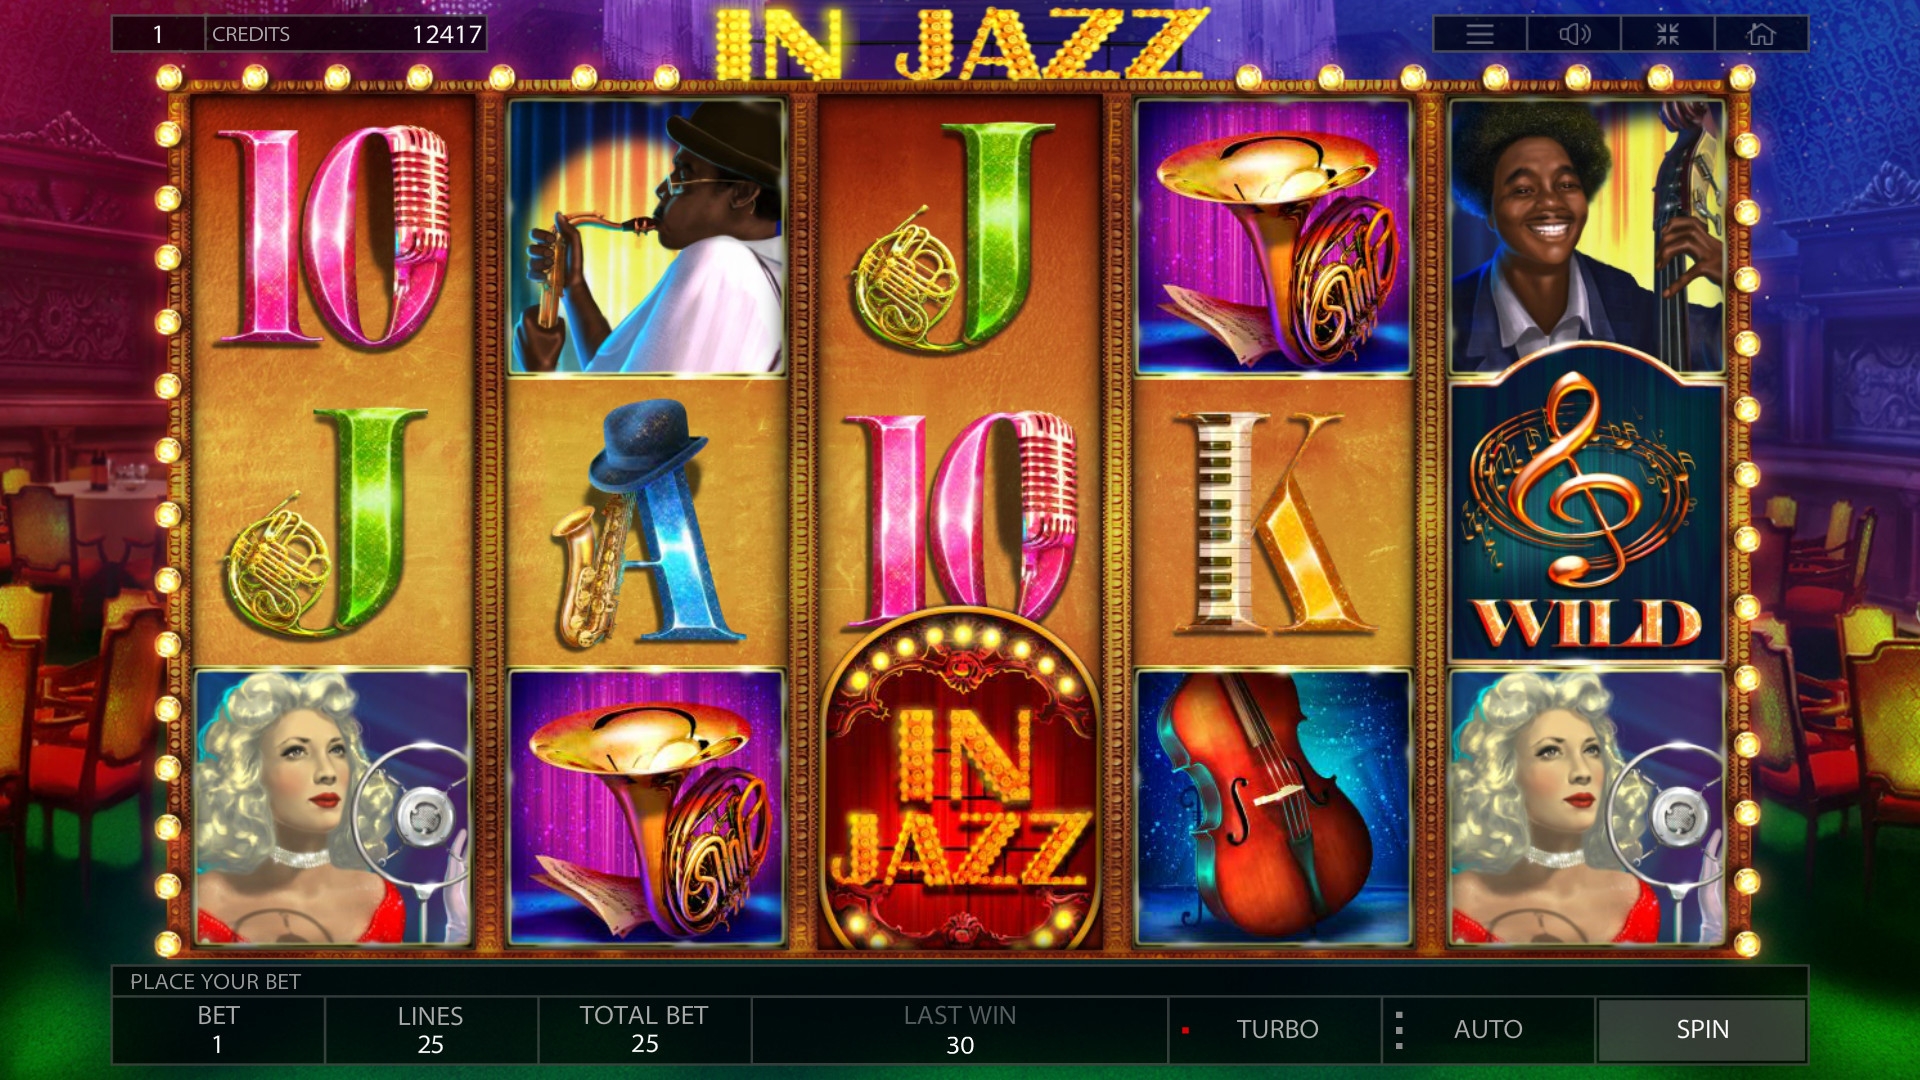 In Jazz (In Jazz) from category Slots